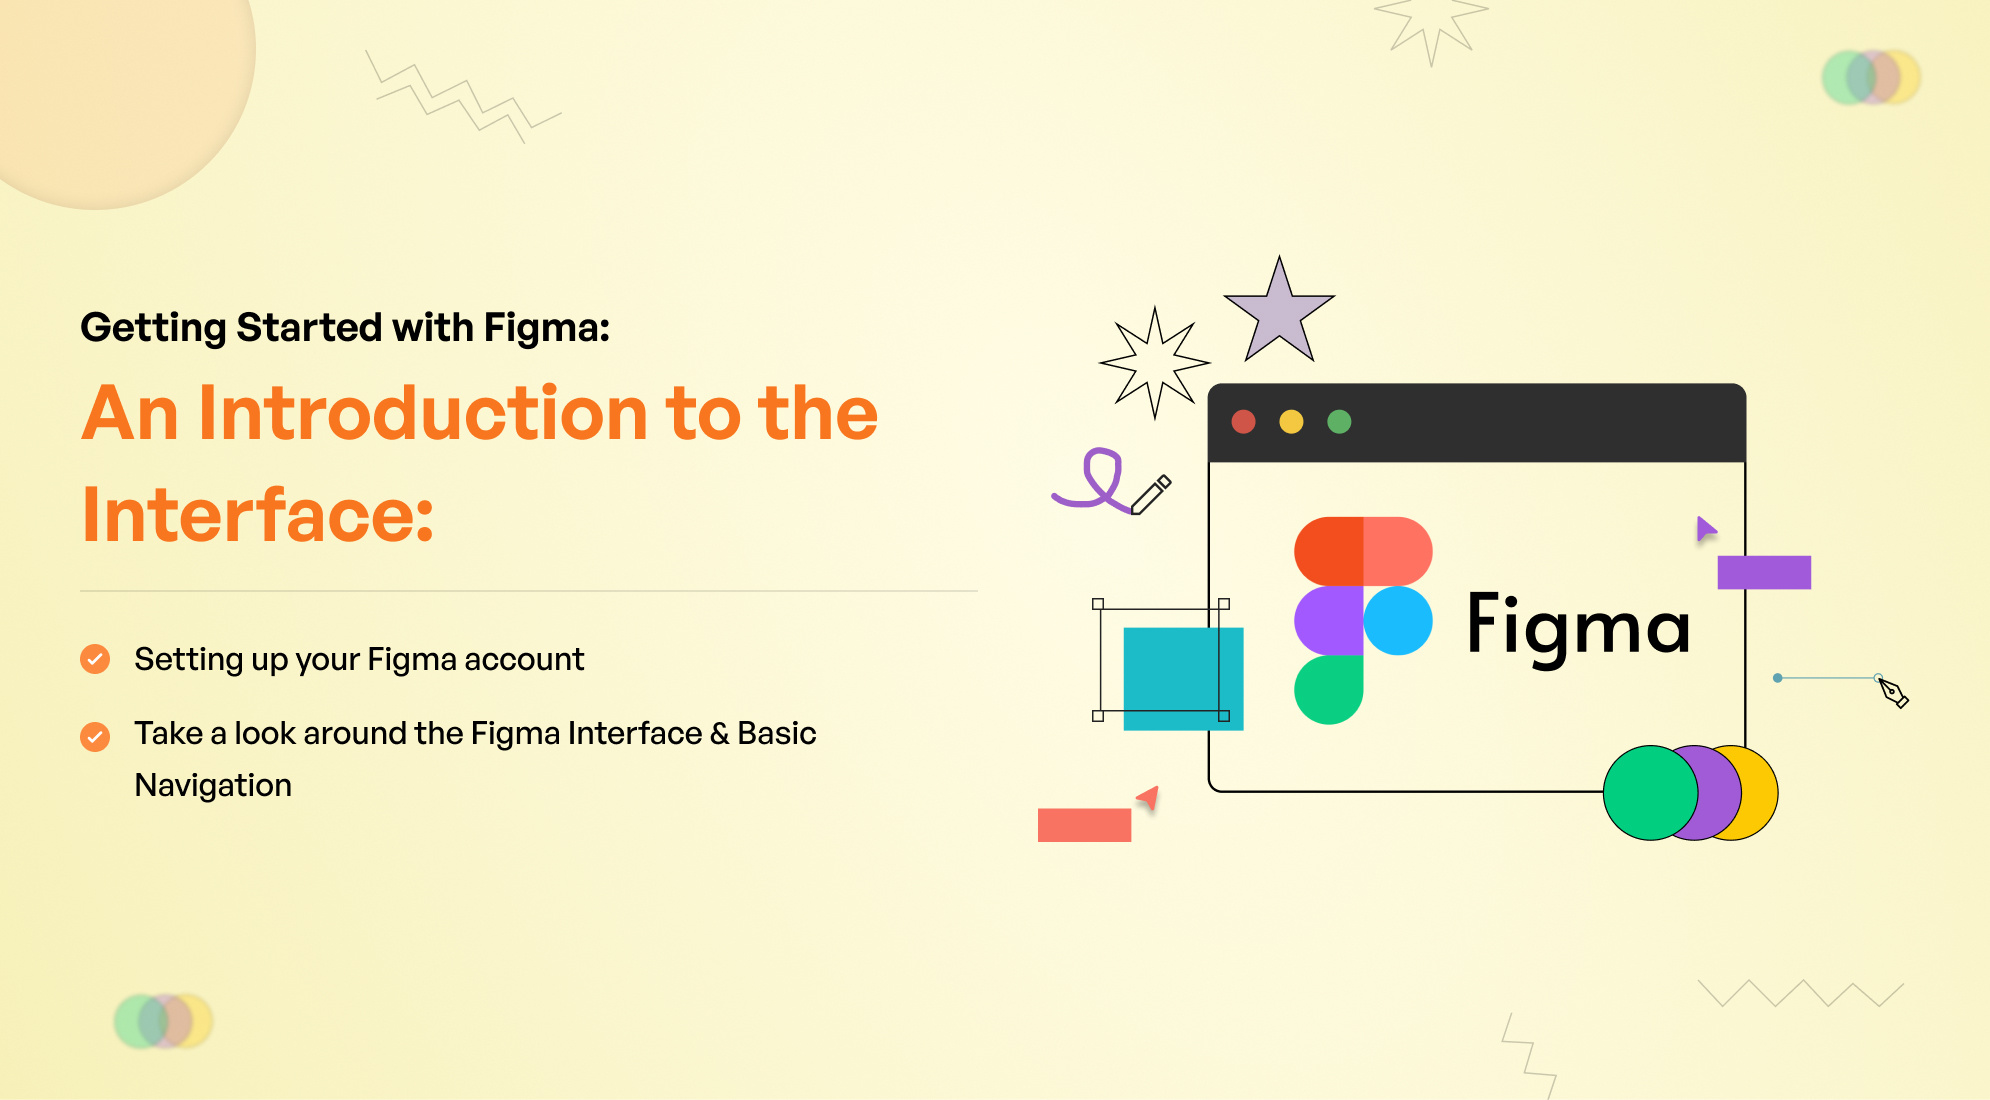 Getting Started with Figma: An Introduction to the Interface